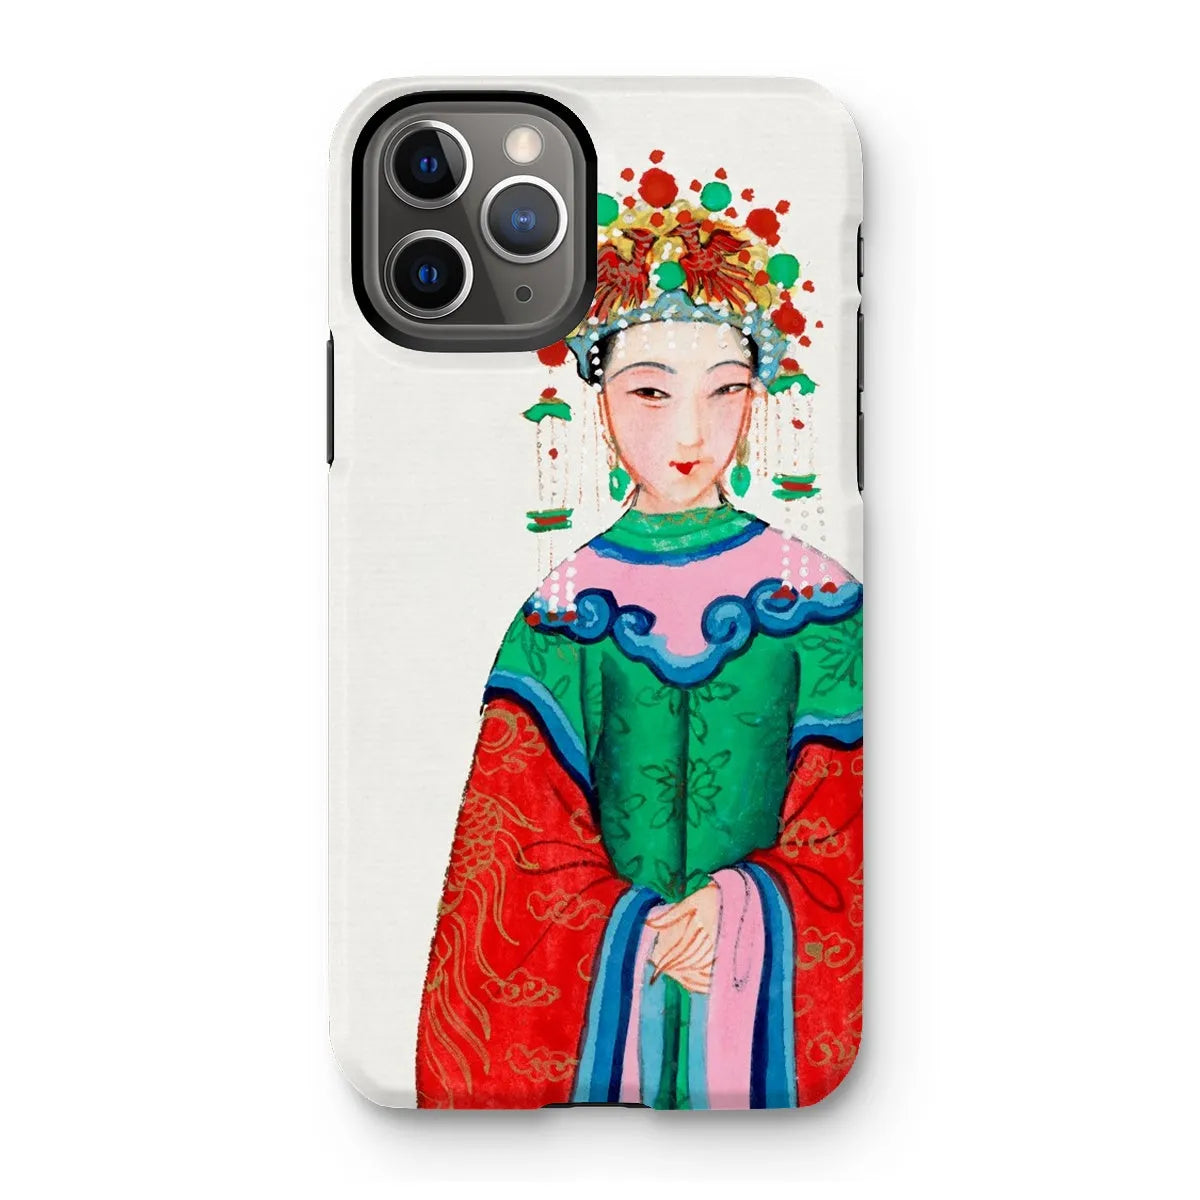 Imperial Princess - Chinese Aesthetic Painting Phone Case - Iphone 11 Pro / Matte - Mobile Phone Cases - Aesthetic Art